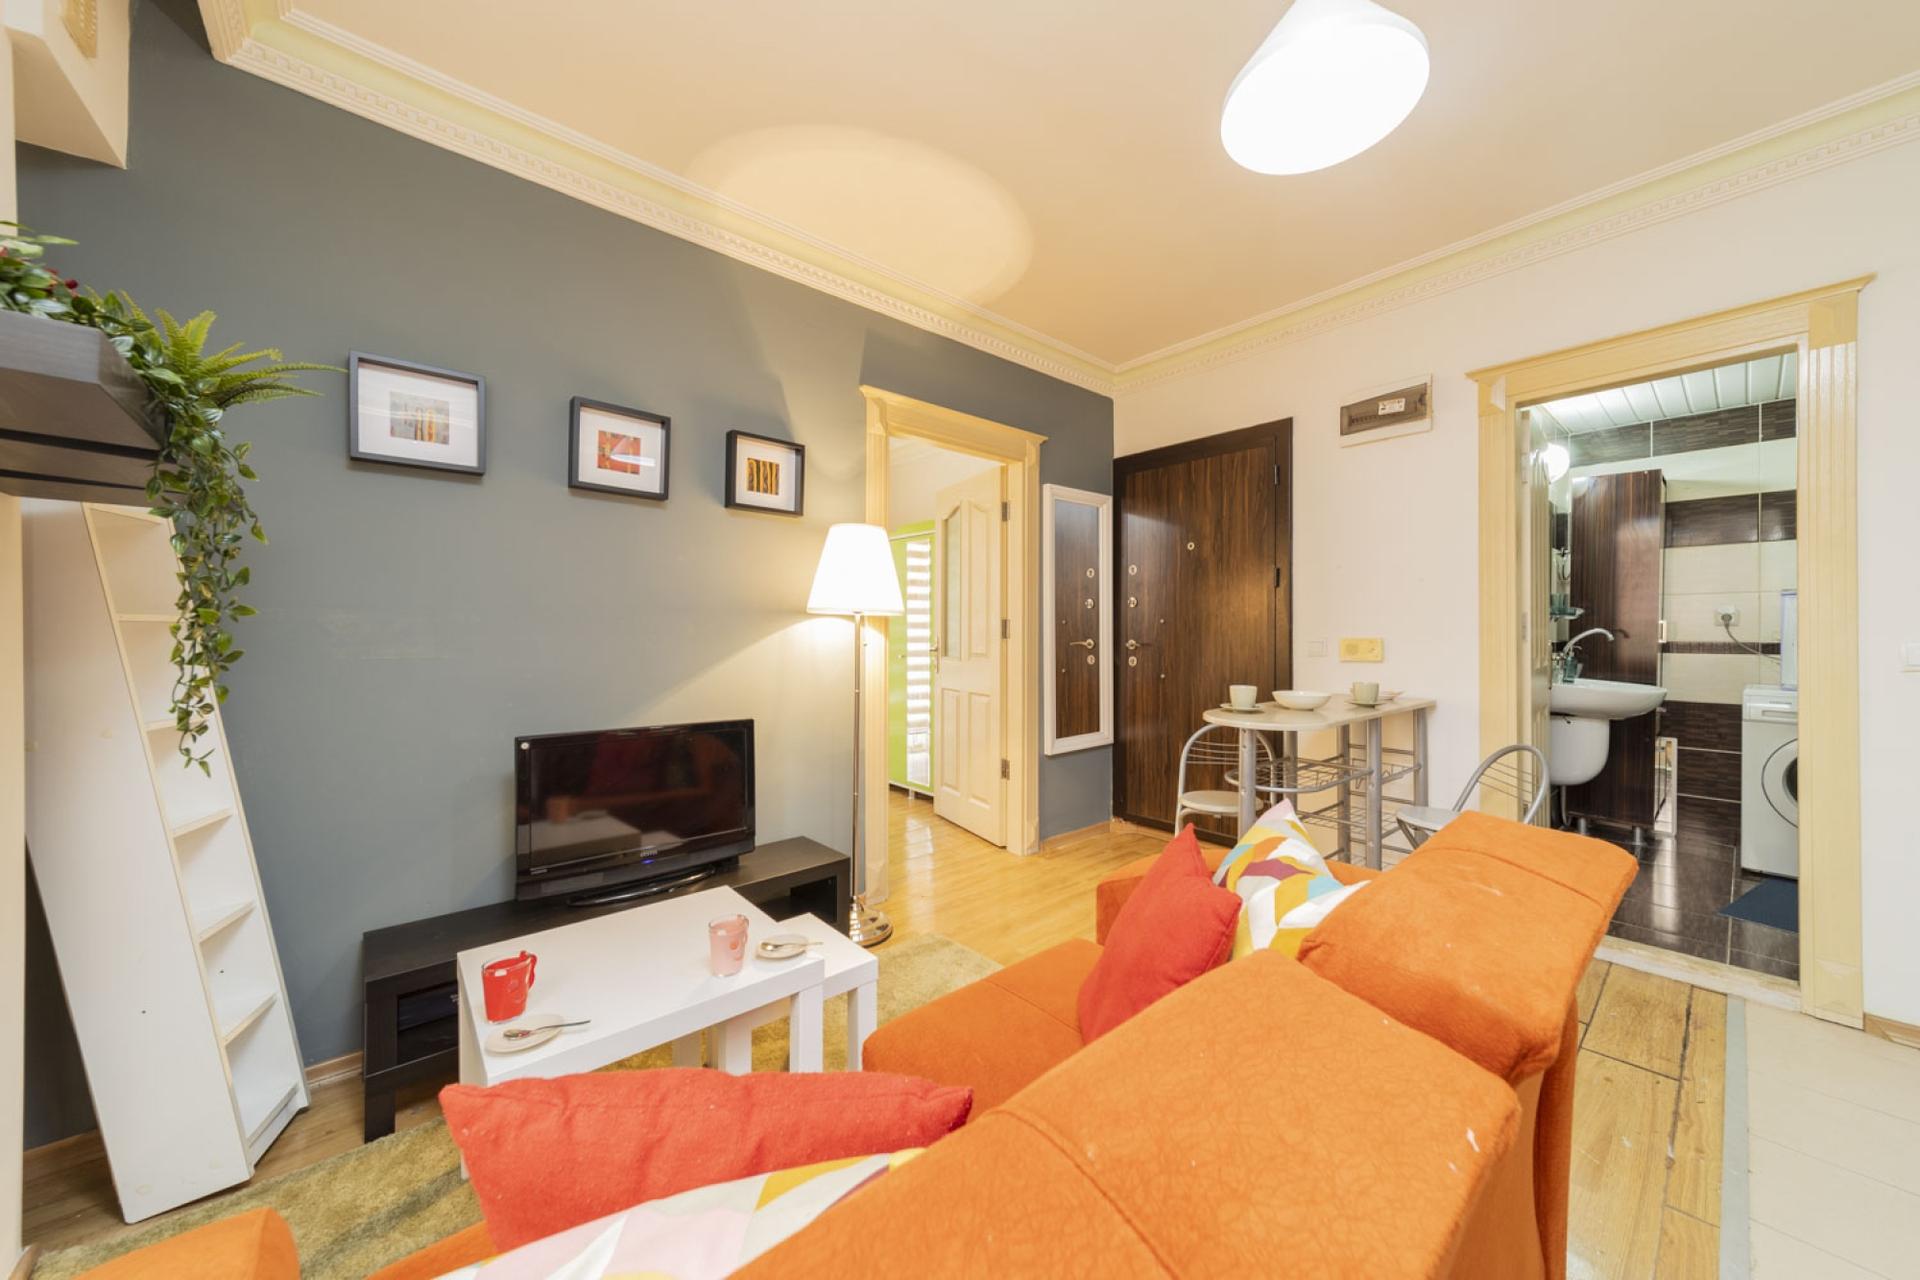 This living room offers you total comfort with its orange and comfy sofa.